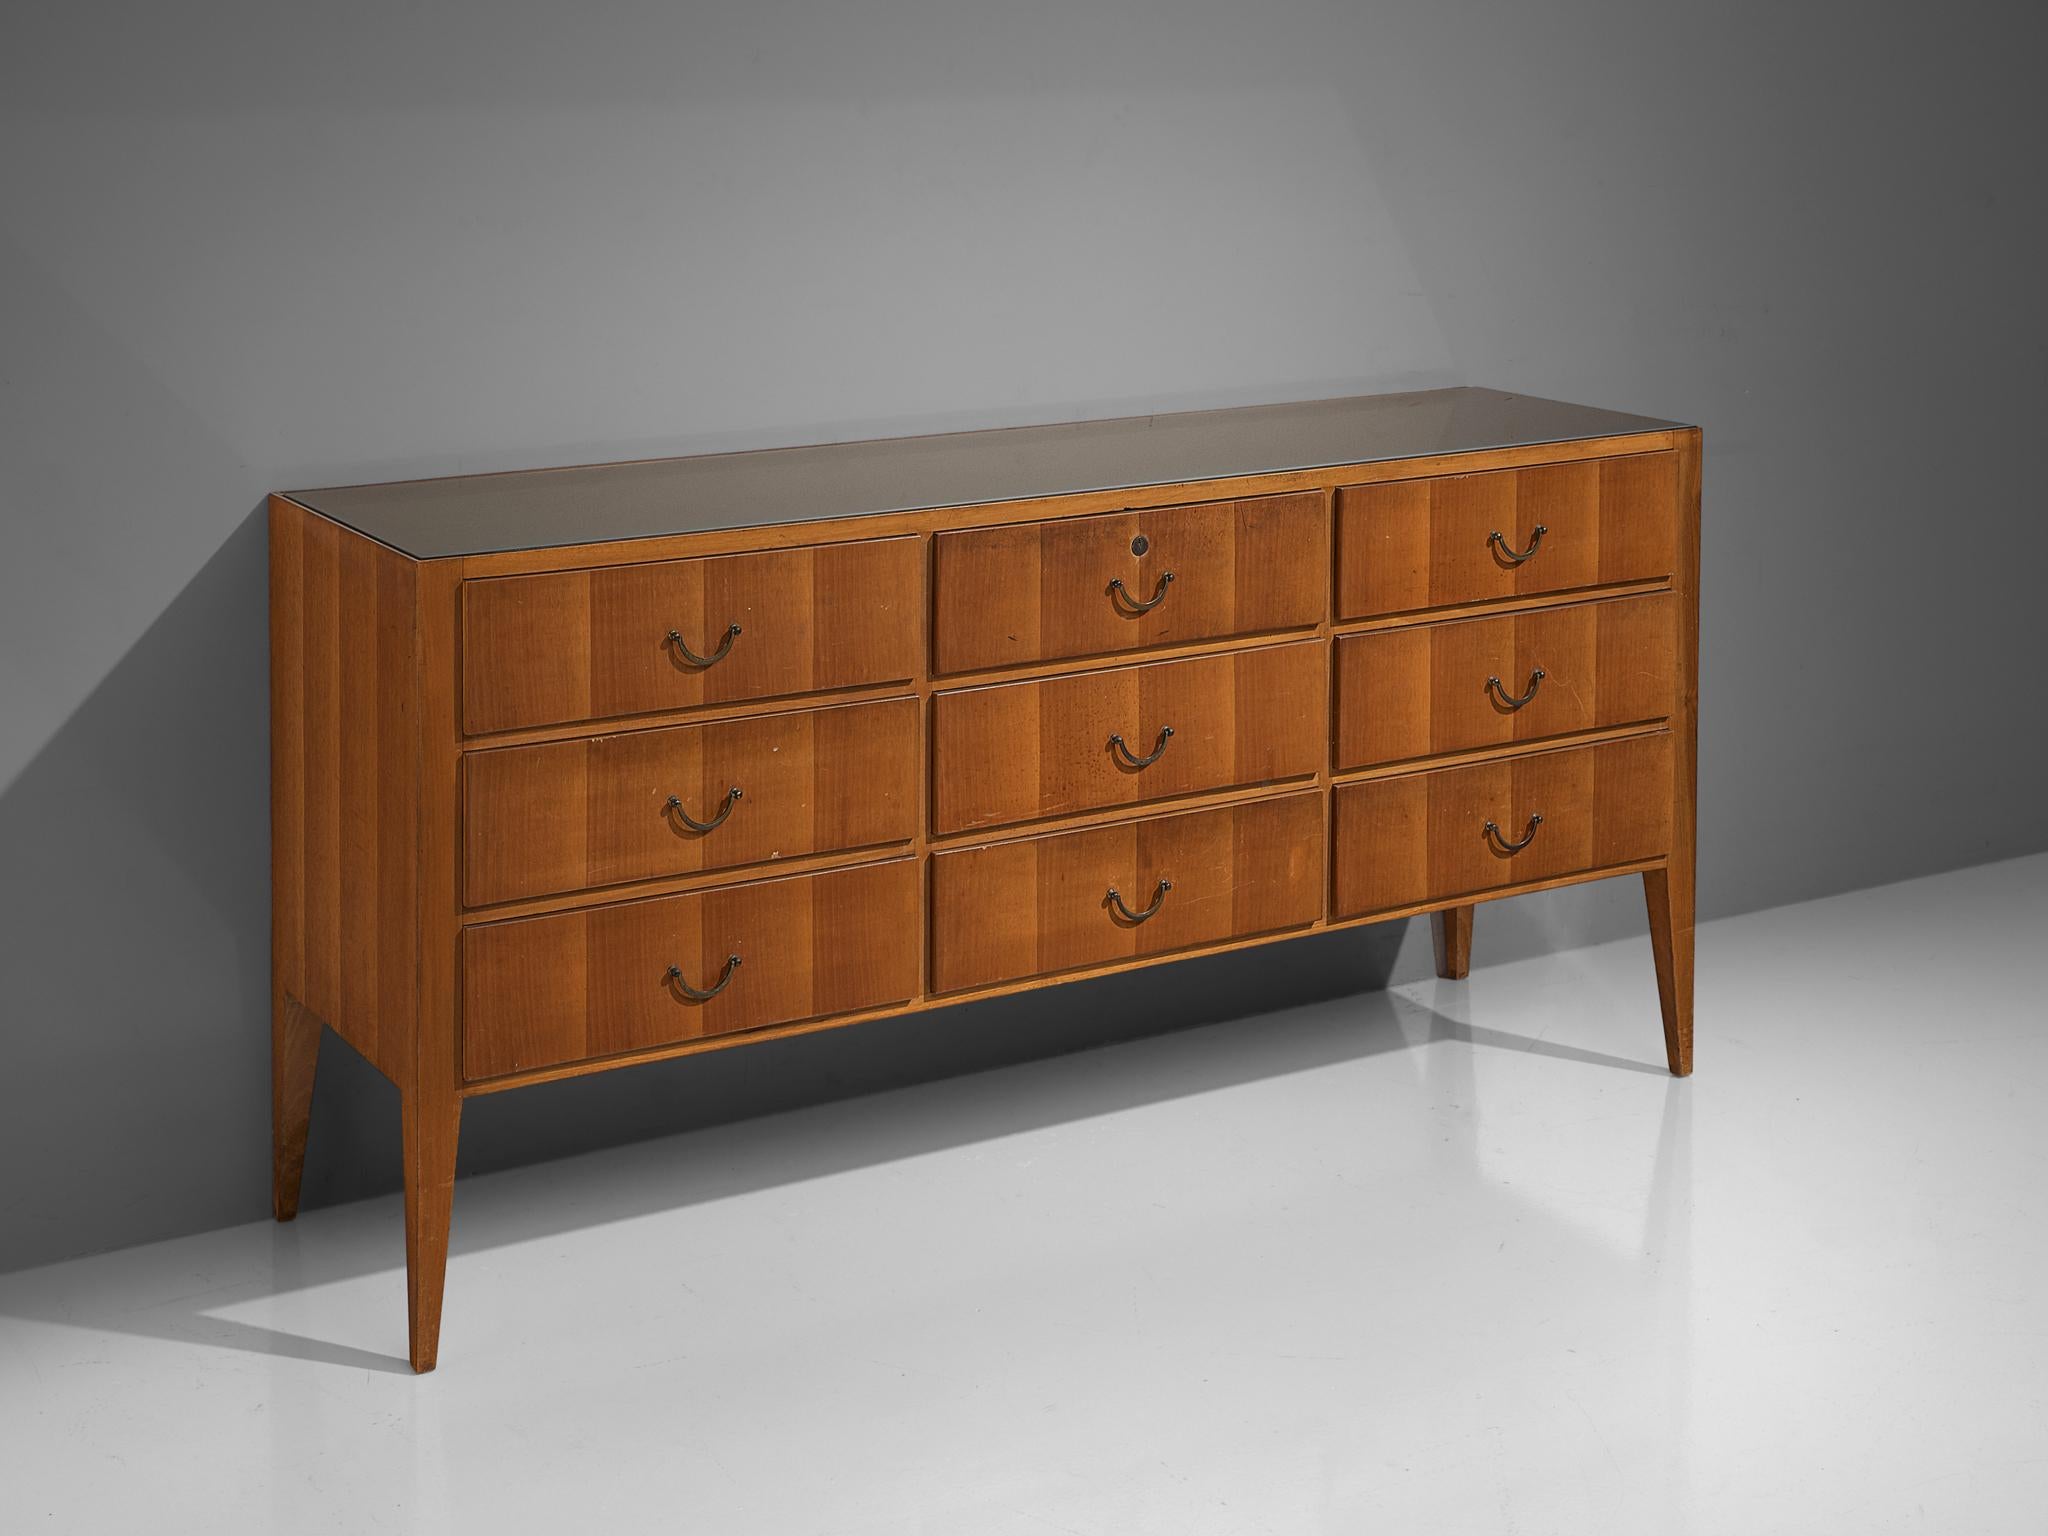 Mid-Century Modern Cabinet with Drawers in Walnut and Brass, Italy, 1950s